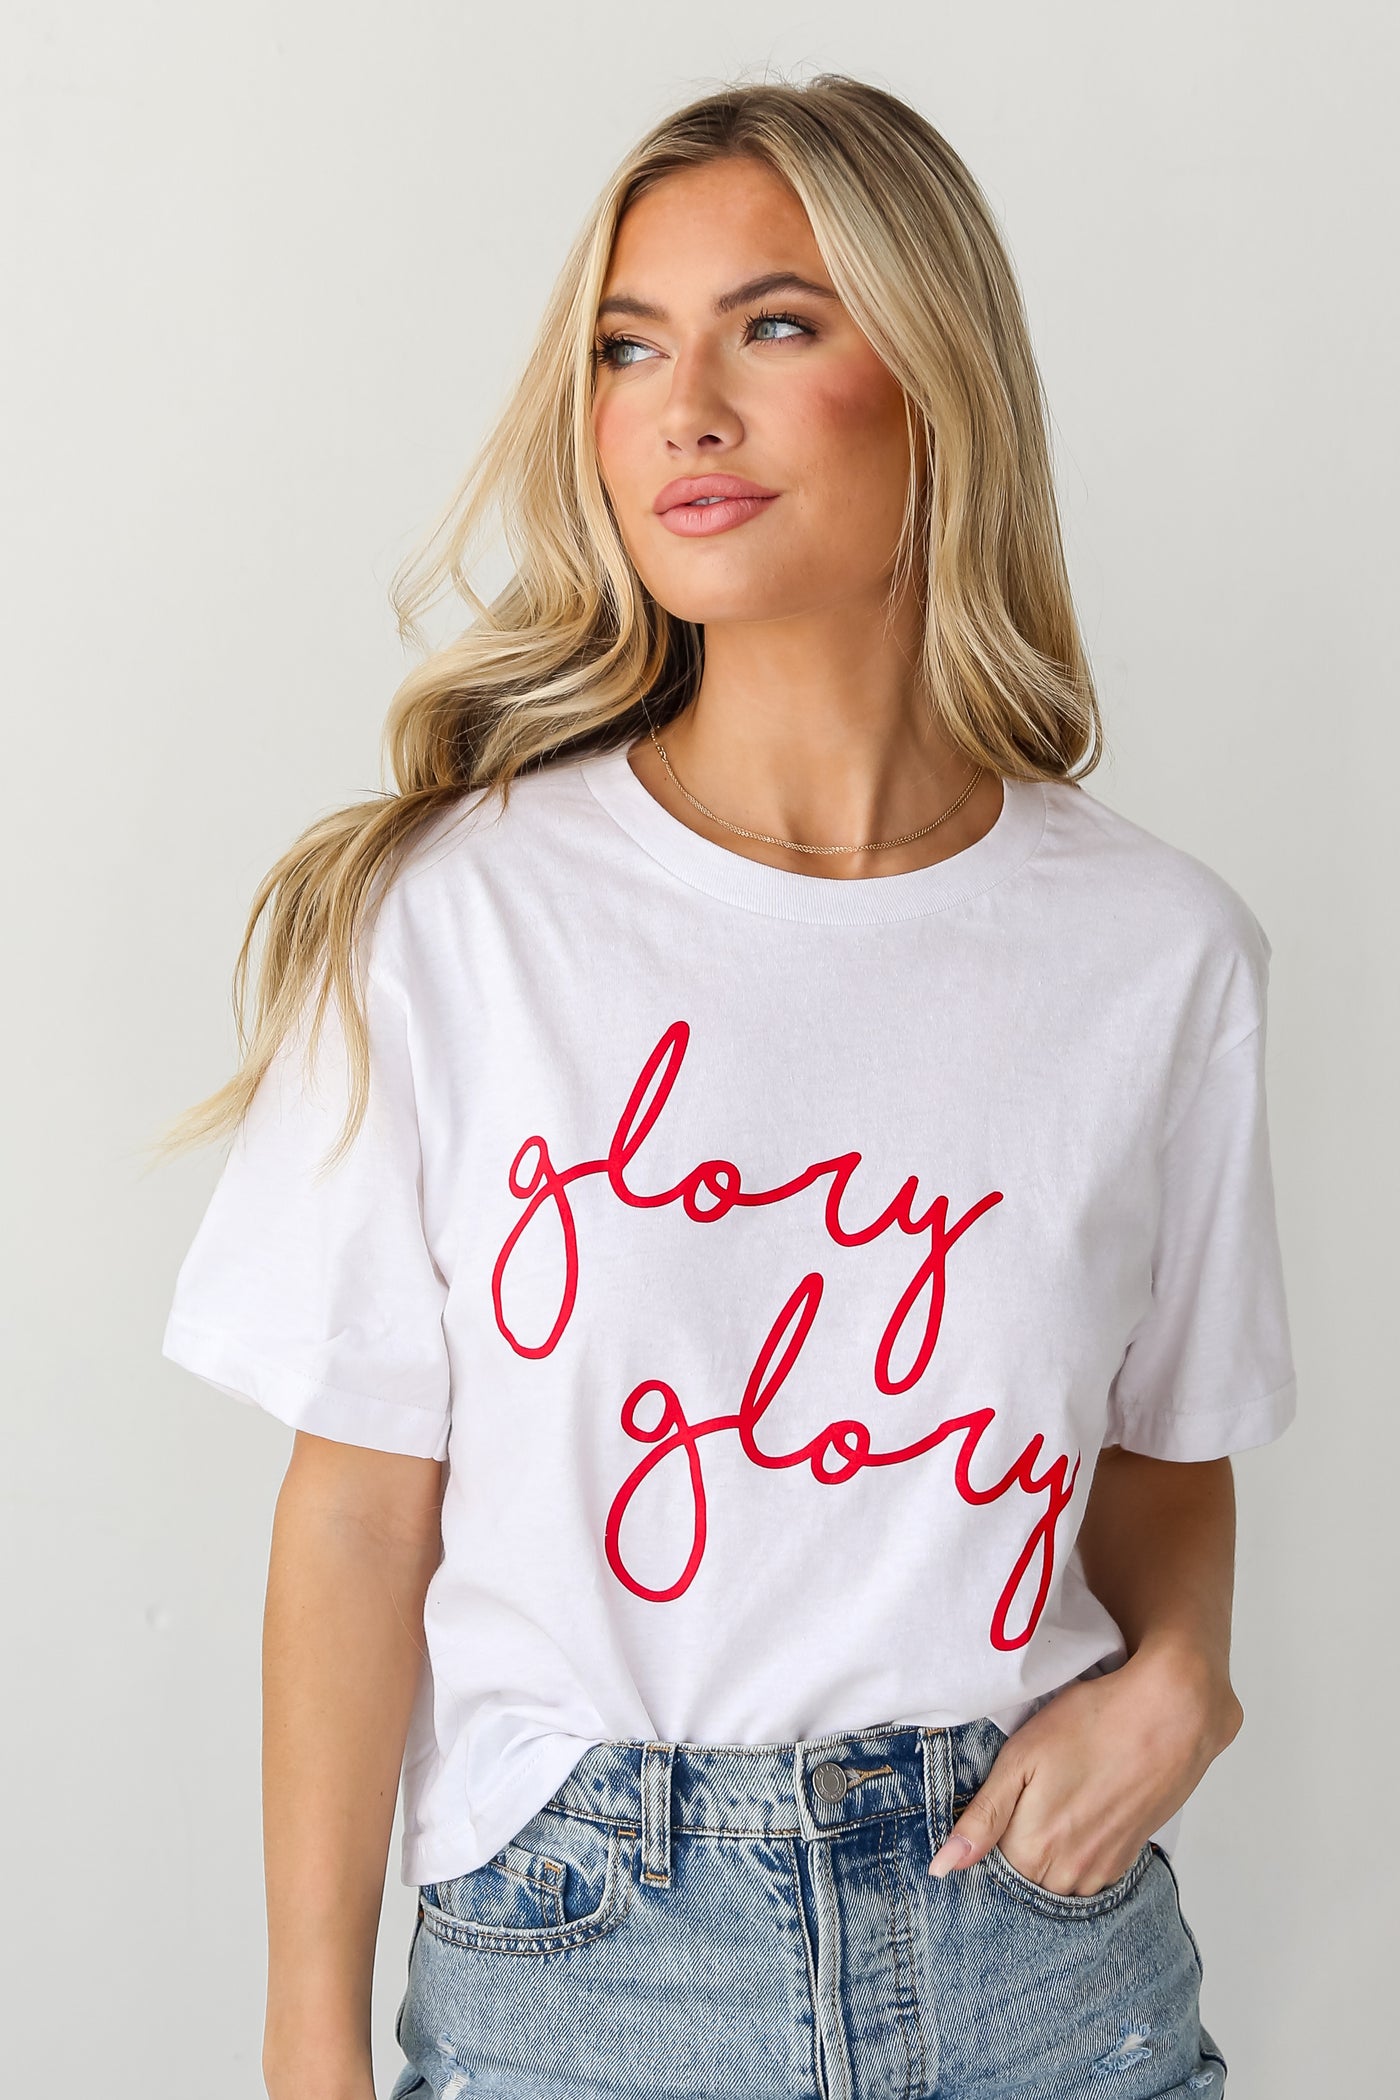 White Glory Glory Cropped Tee front view